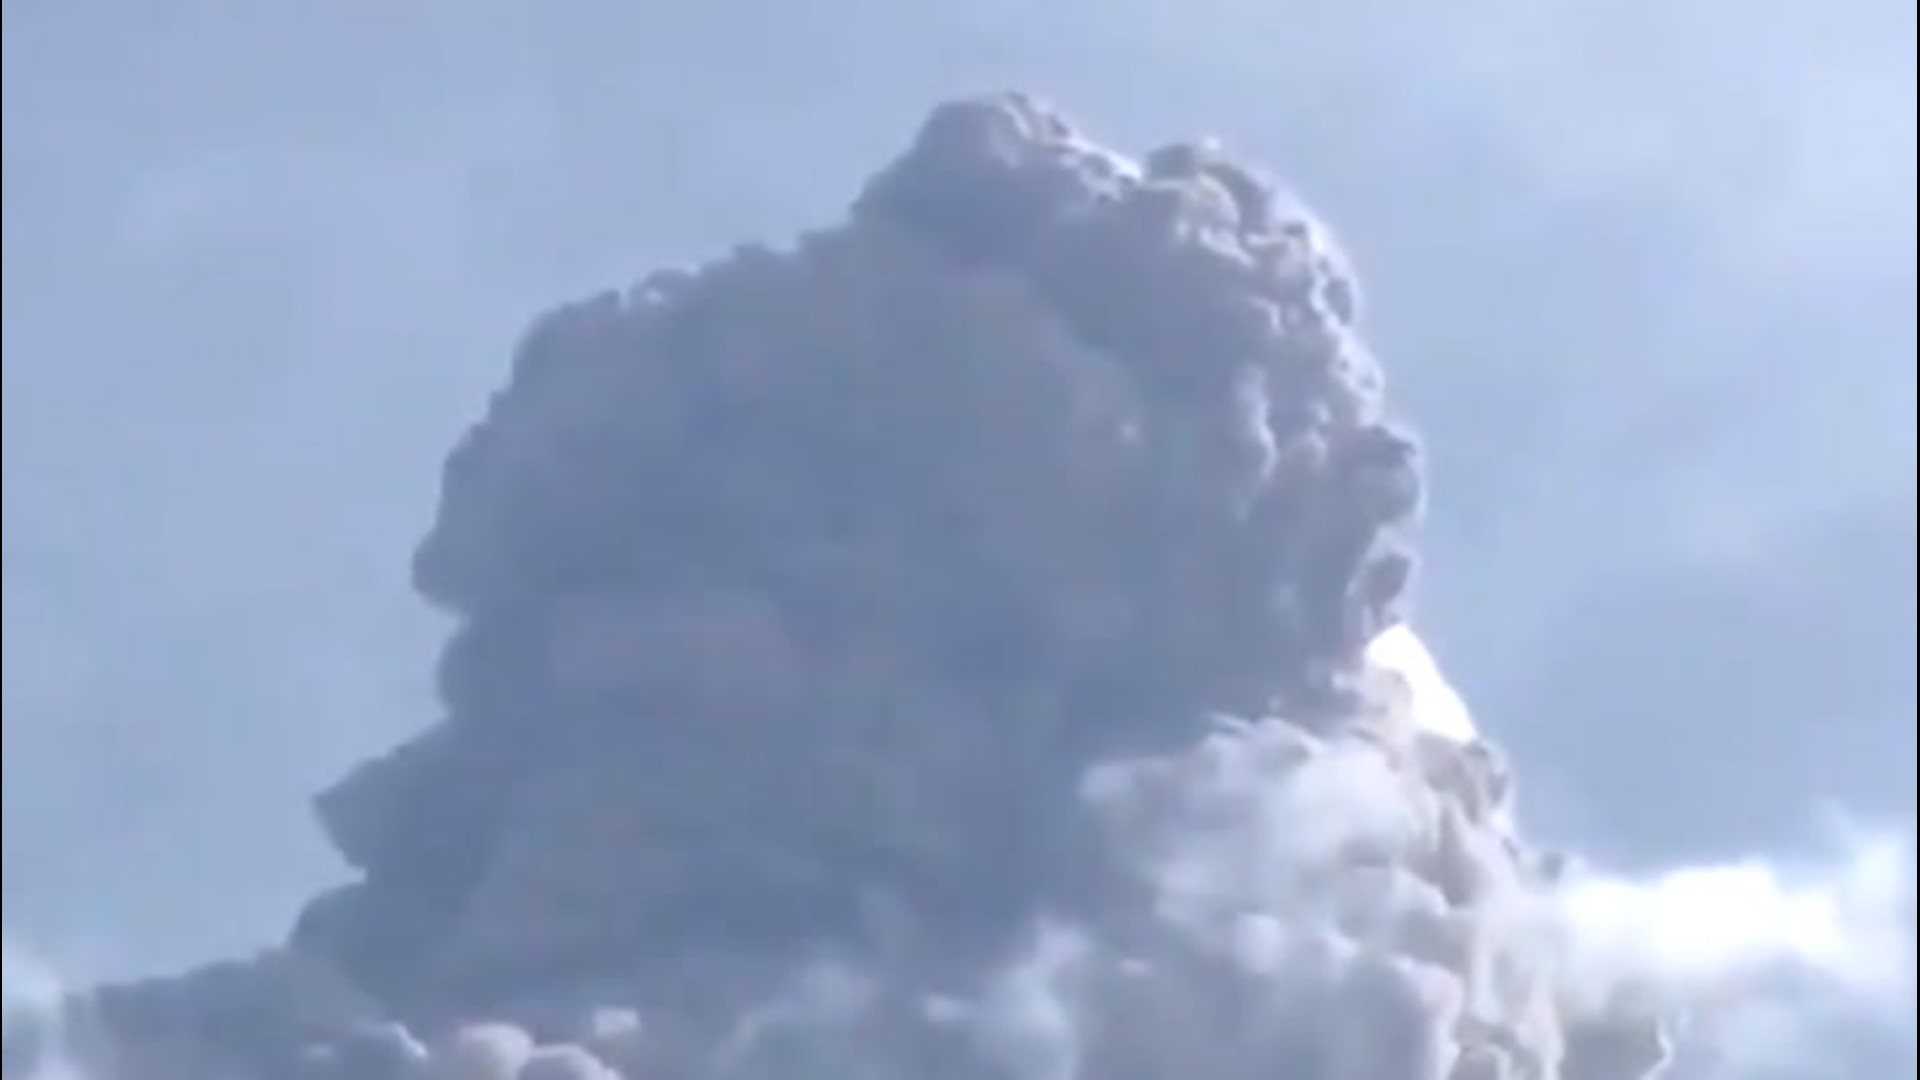 The La Soufrière volcano on the Caribbean island of St. Vincent erupted in the morning of April 9, launching plumes of ash high into the air, prompting evacuations in the area.